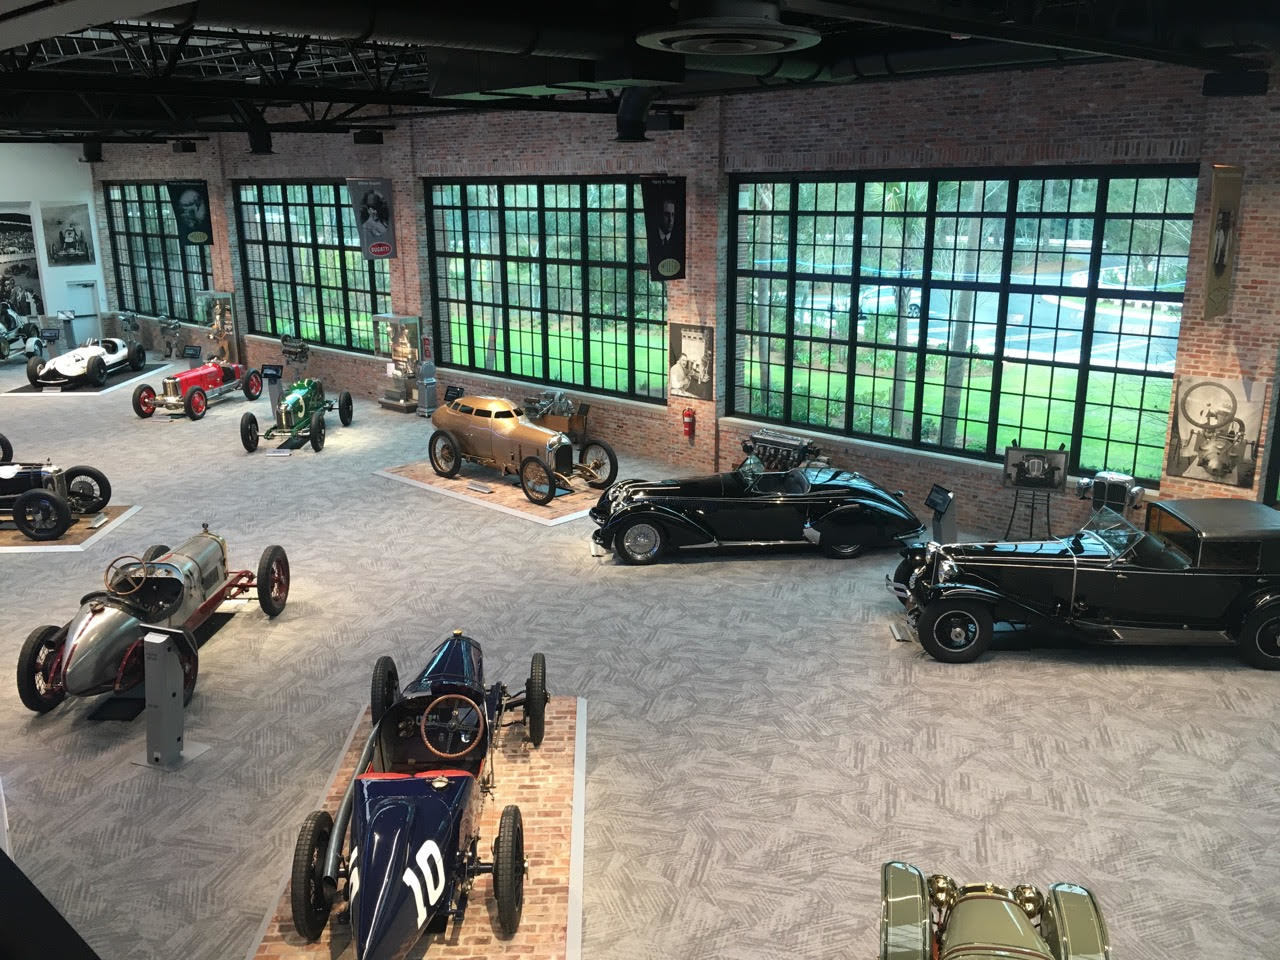 At any time, the 35,000-square-foot, two-story Brumos Collection museum will show 38 of the 65 cars owned by Dan Davis, the former chairman of Winn-Dixie.